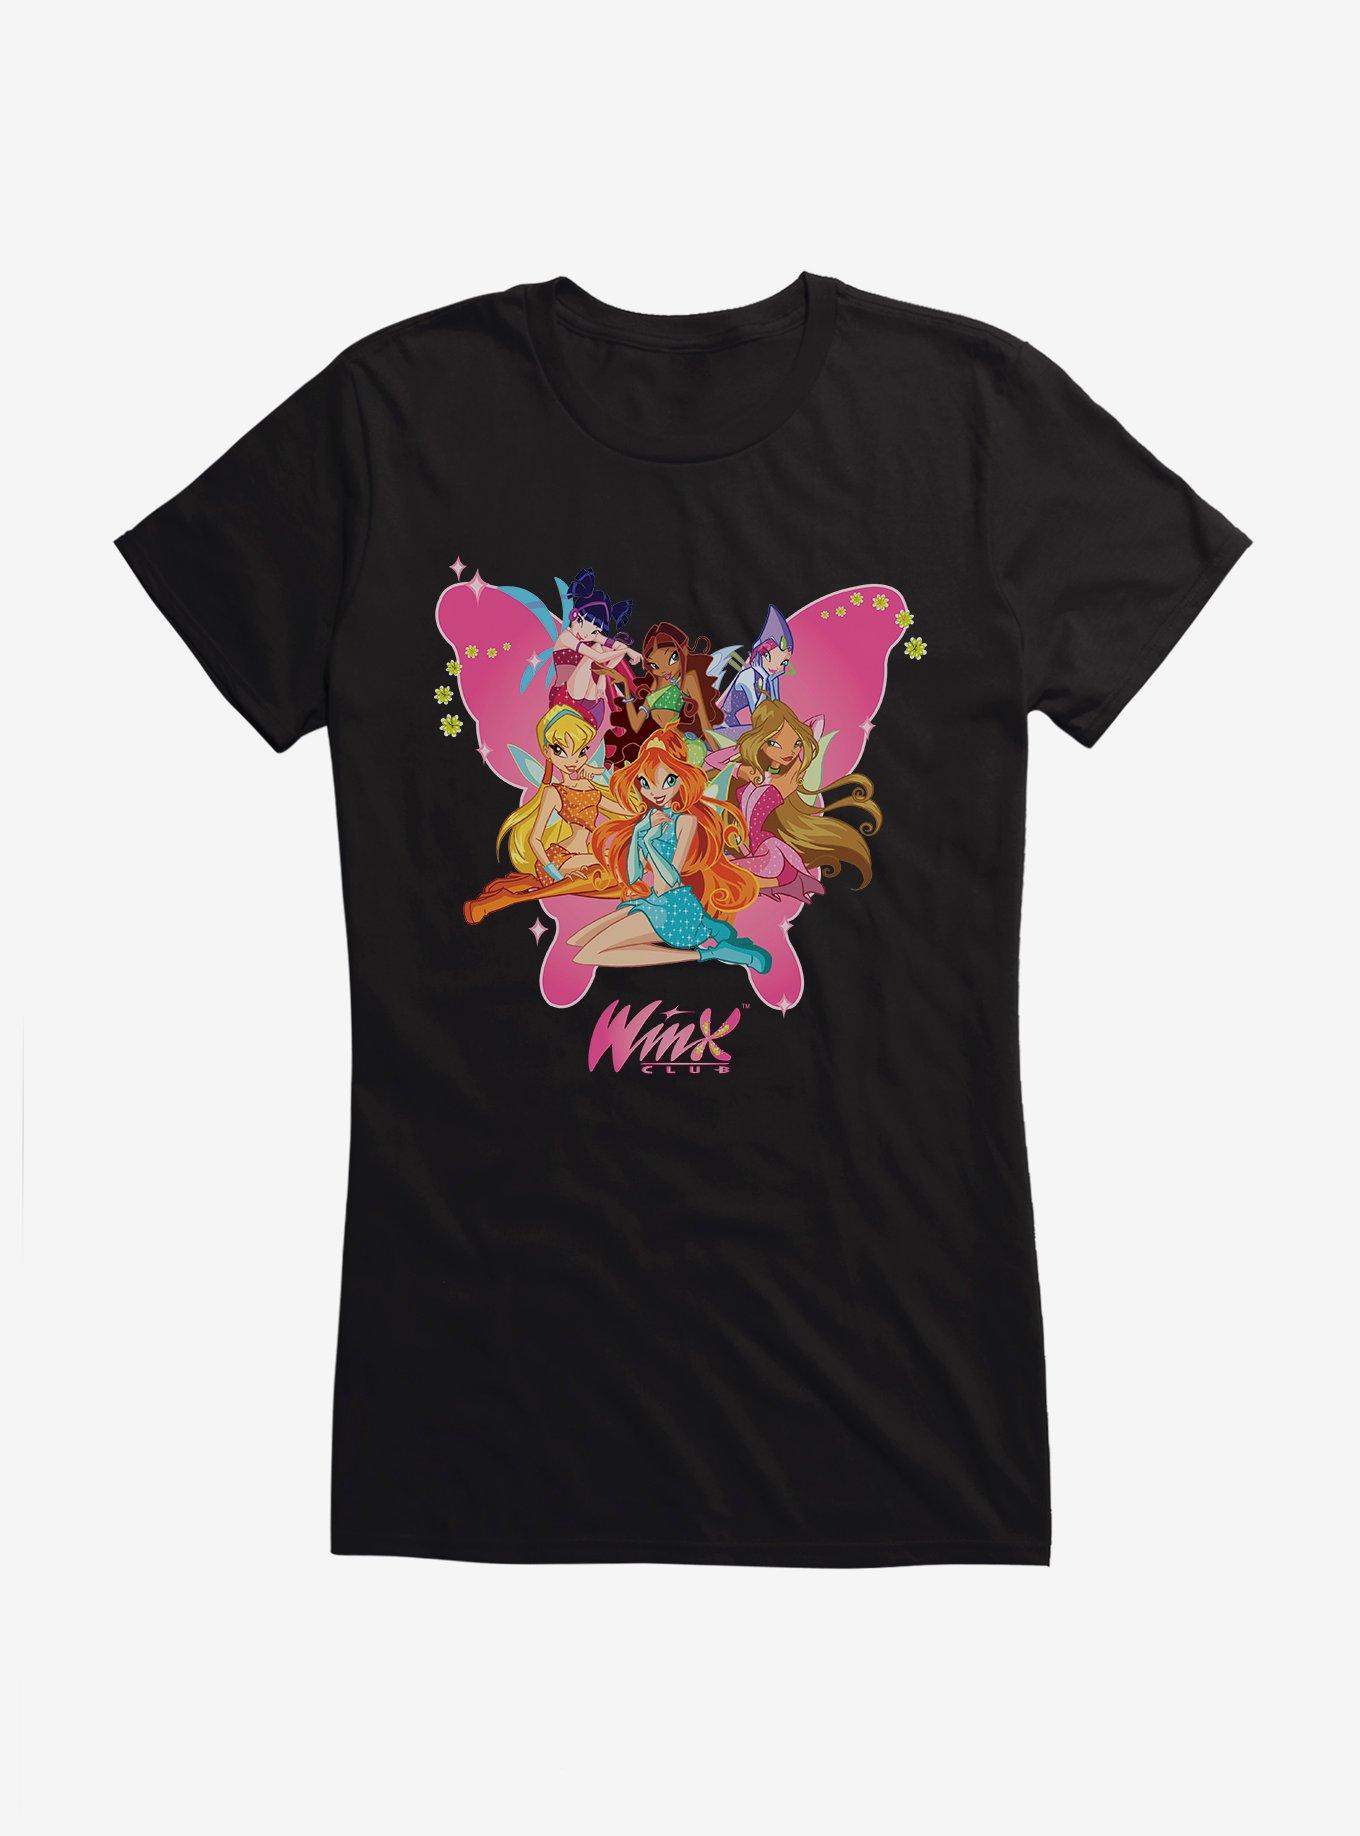 Winx Club Join The Club Butterfly Girls T-Shirt